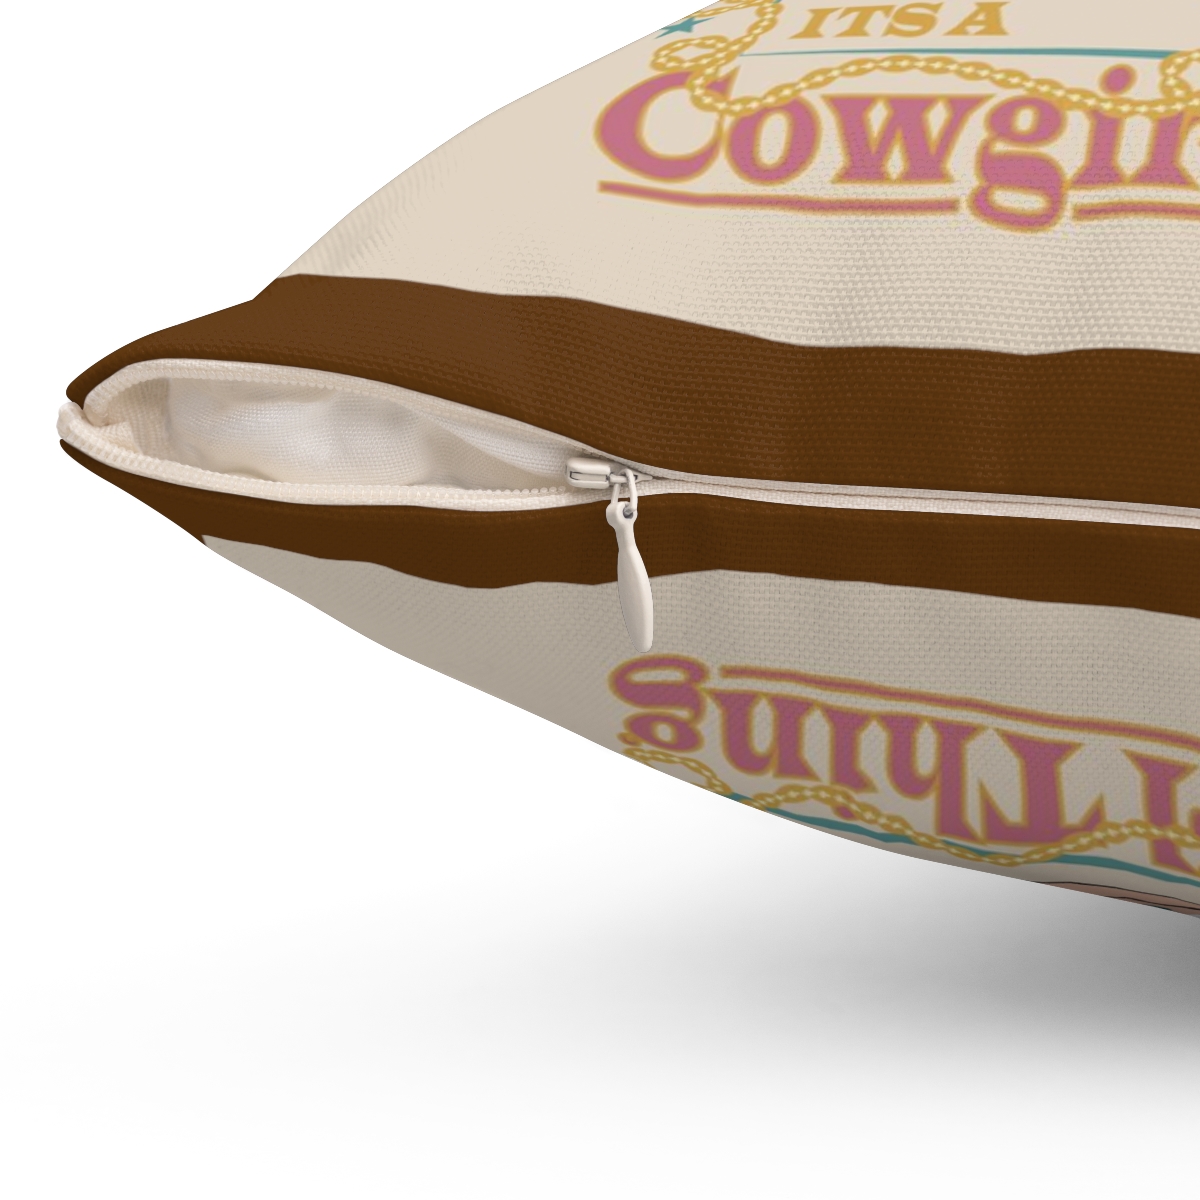 Square Pillows Cowgirl Bling product thumbnail image